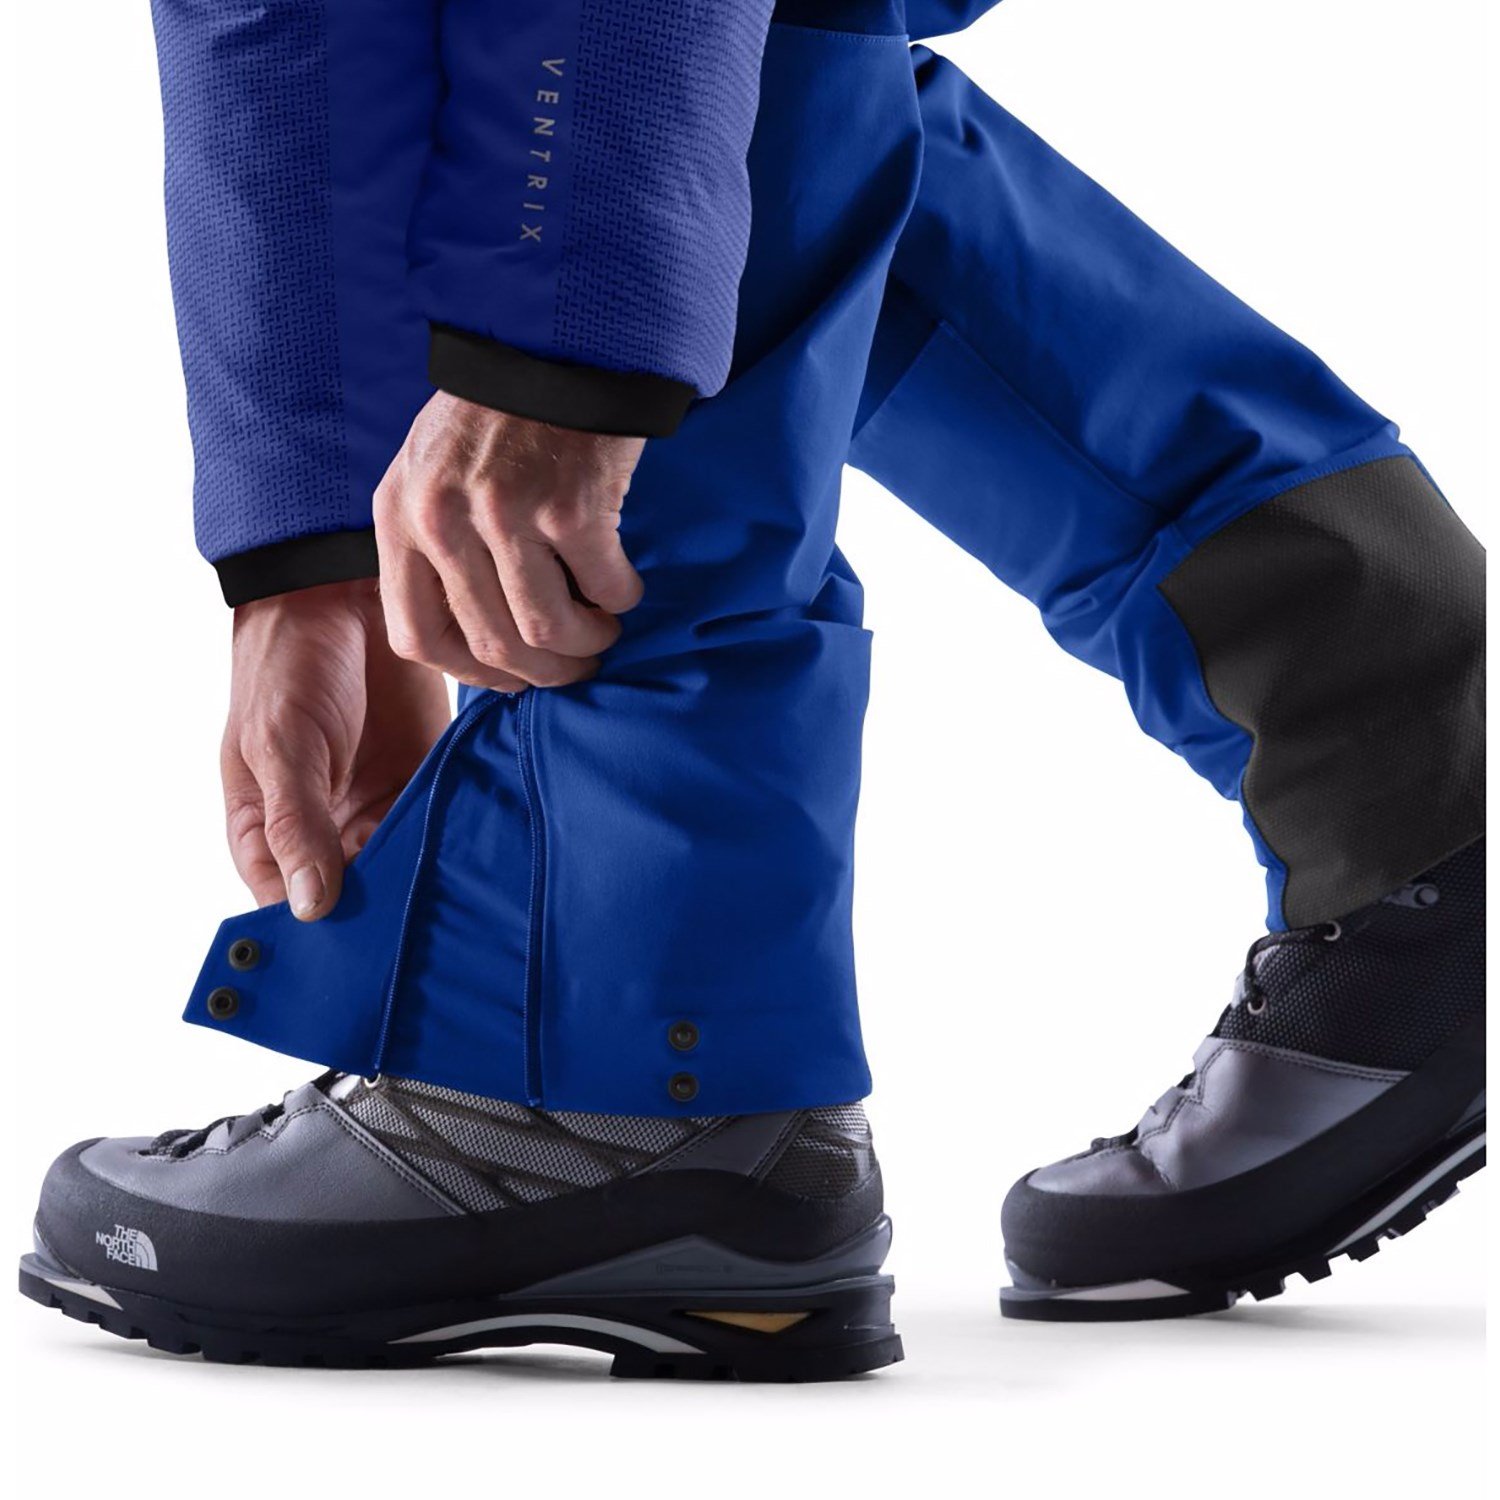 The North Face Summit L4 Soft Shell Pants | evo